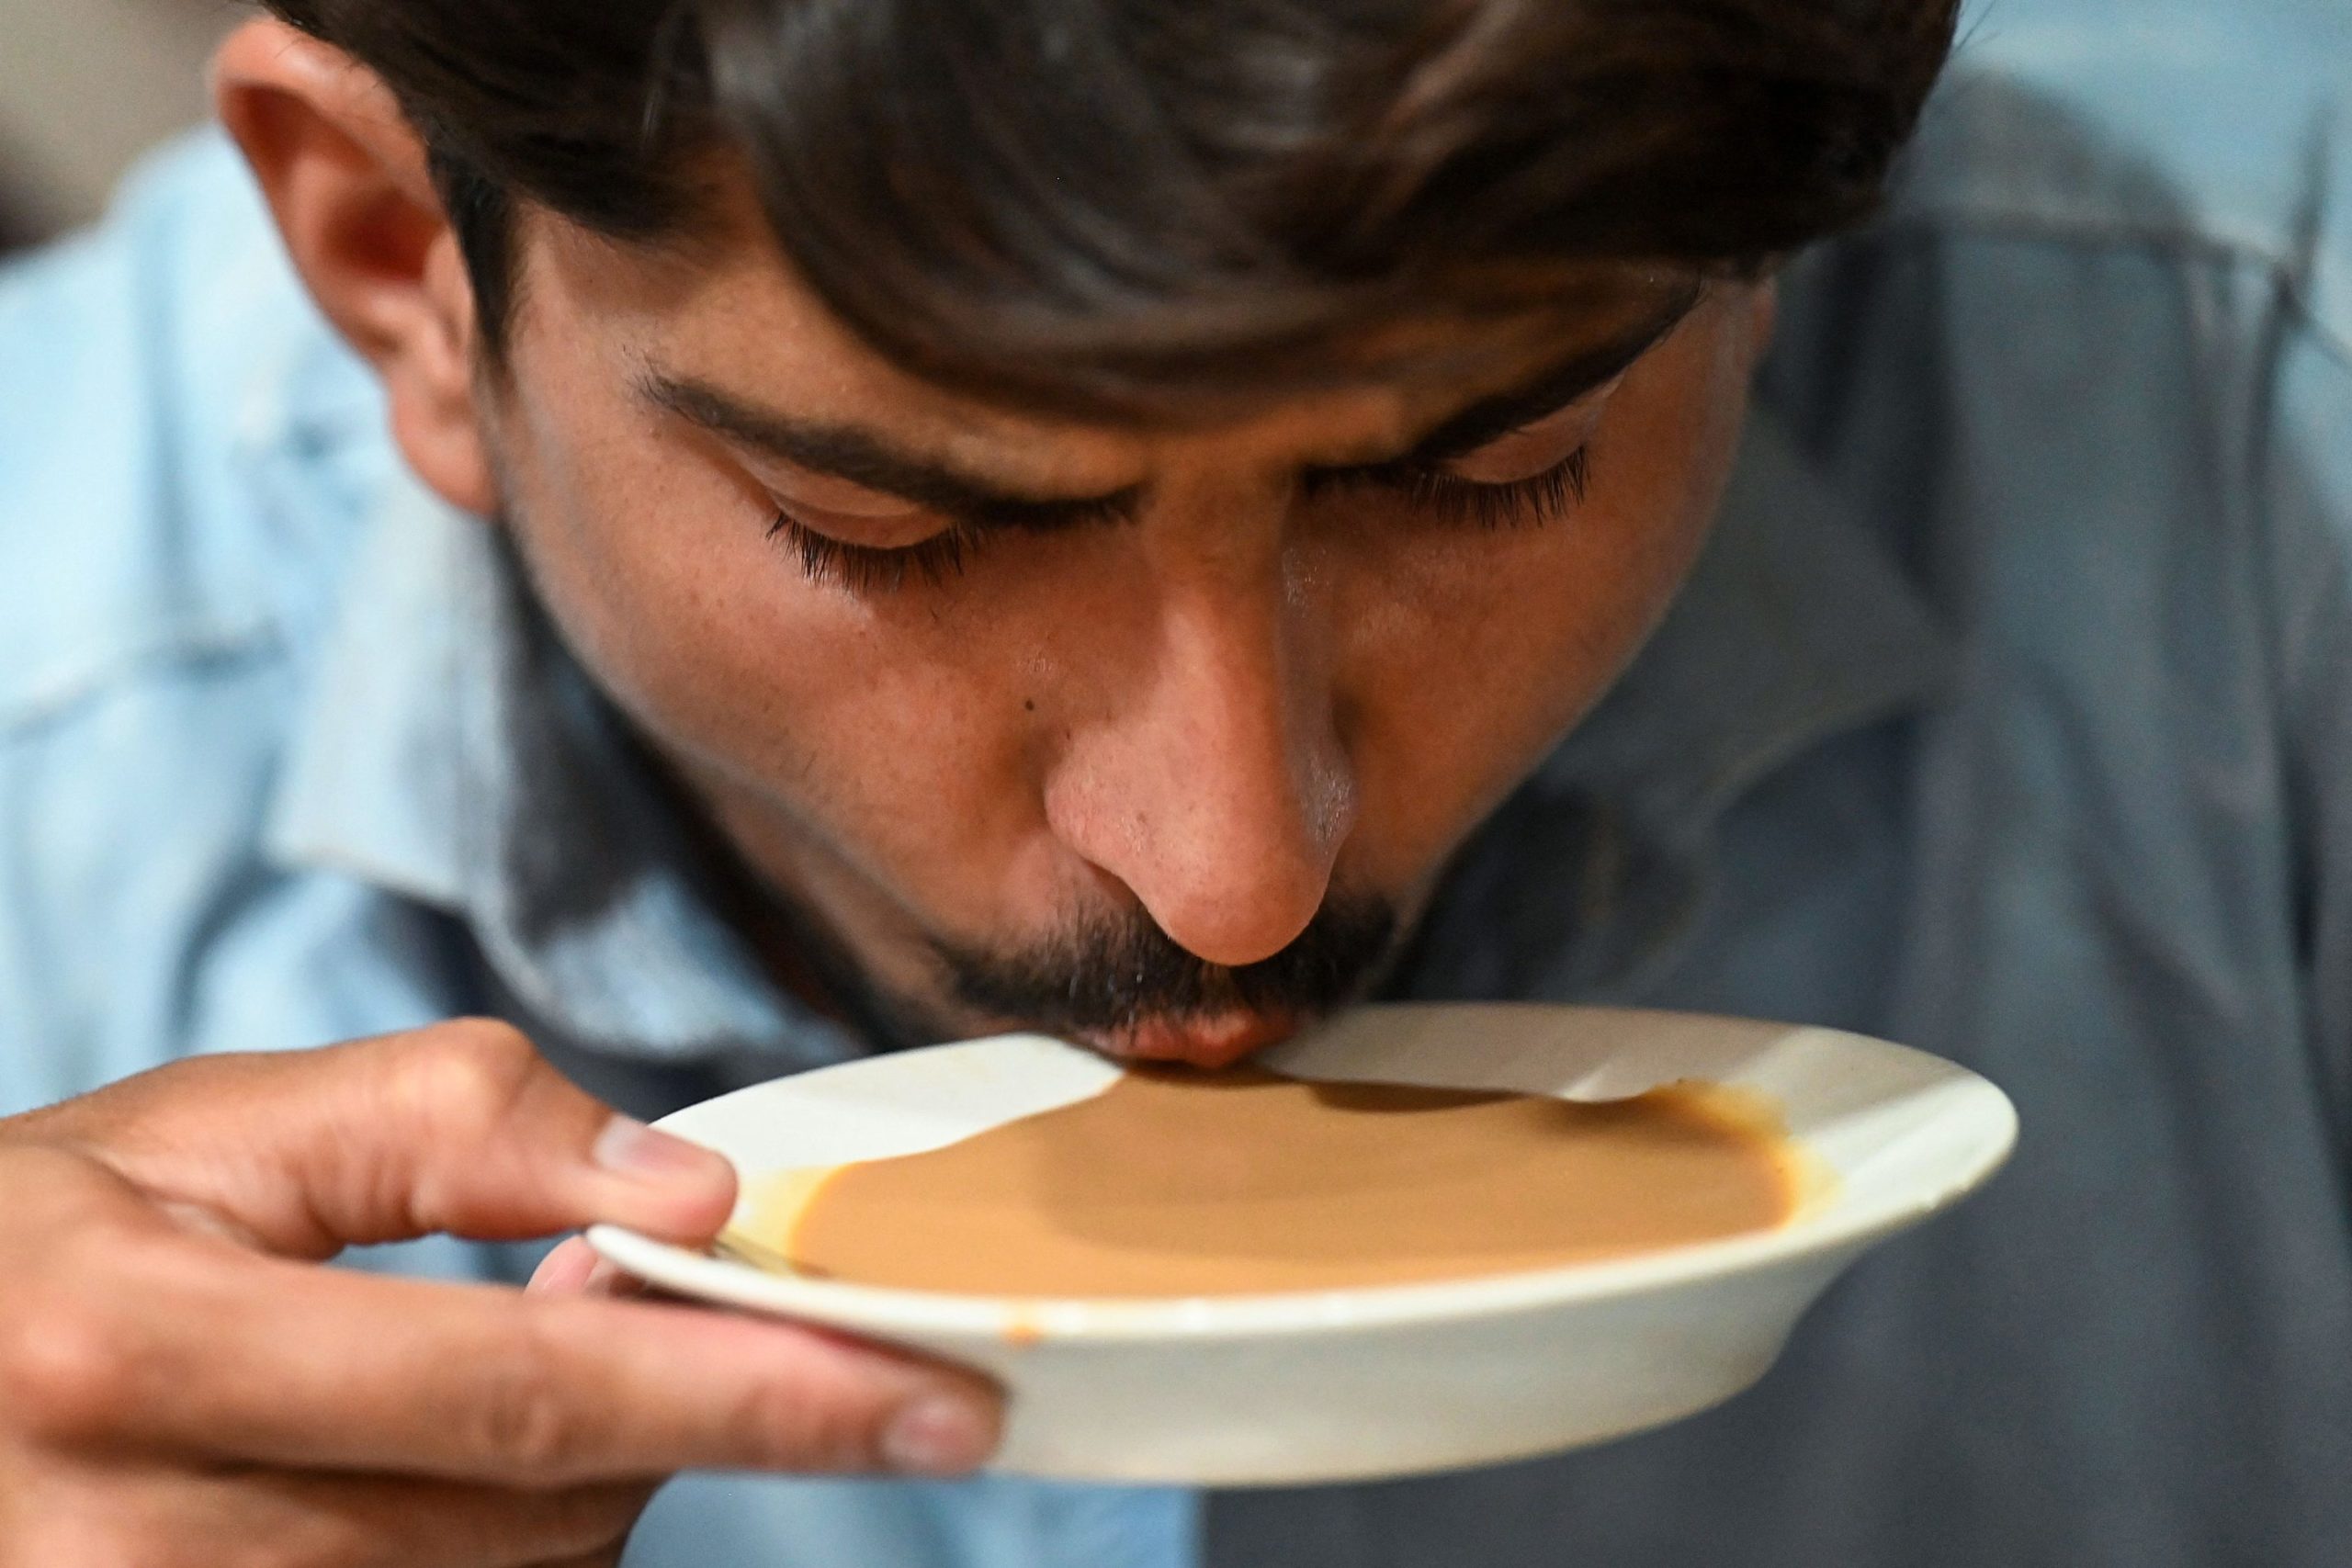 Pakistan asks consumers to drink less tea to solve forex crisis